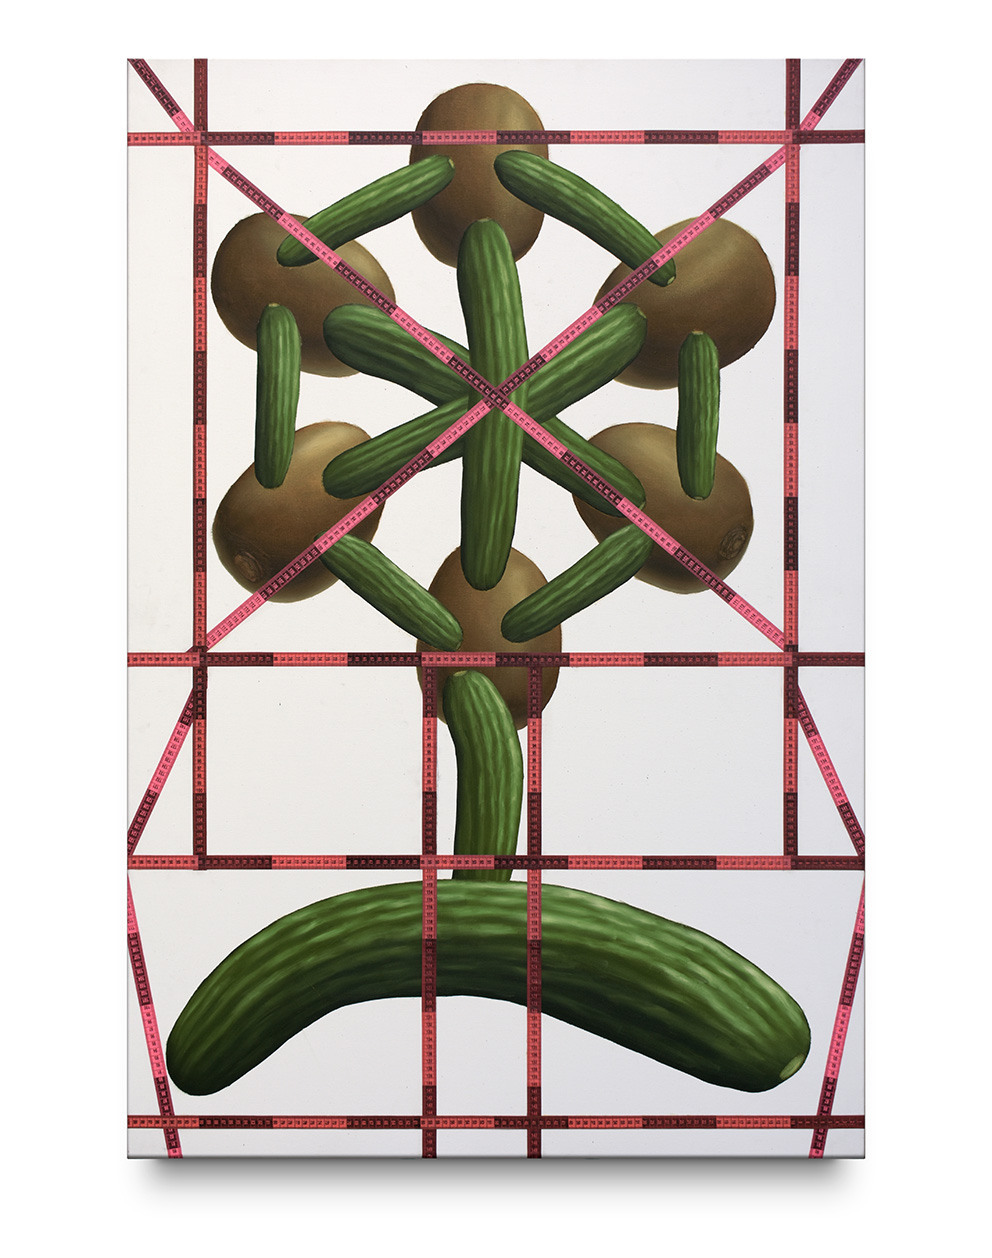 Flower Composition with Kiwis and Cucumbers, 2021, Plastic tape measure and oli on canvas, 100 x 150 cm